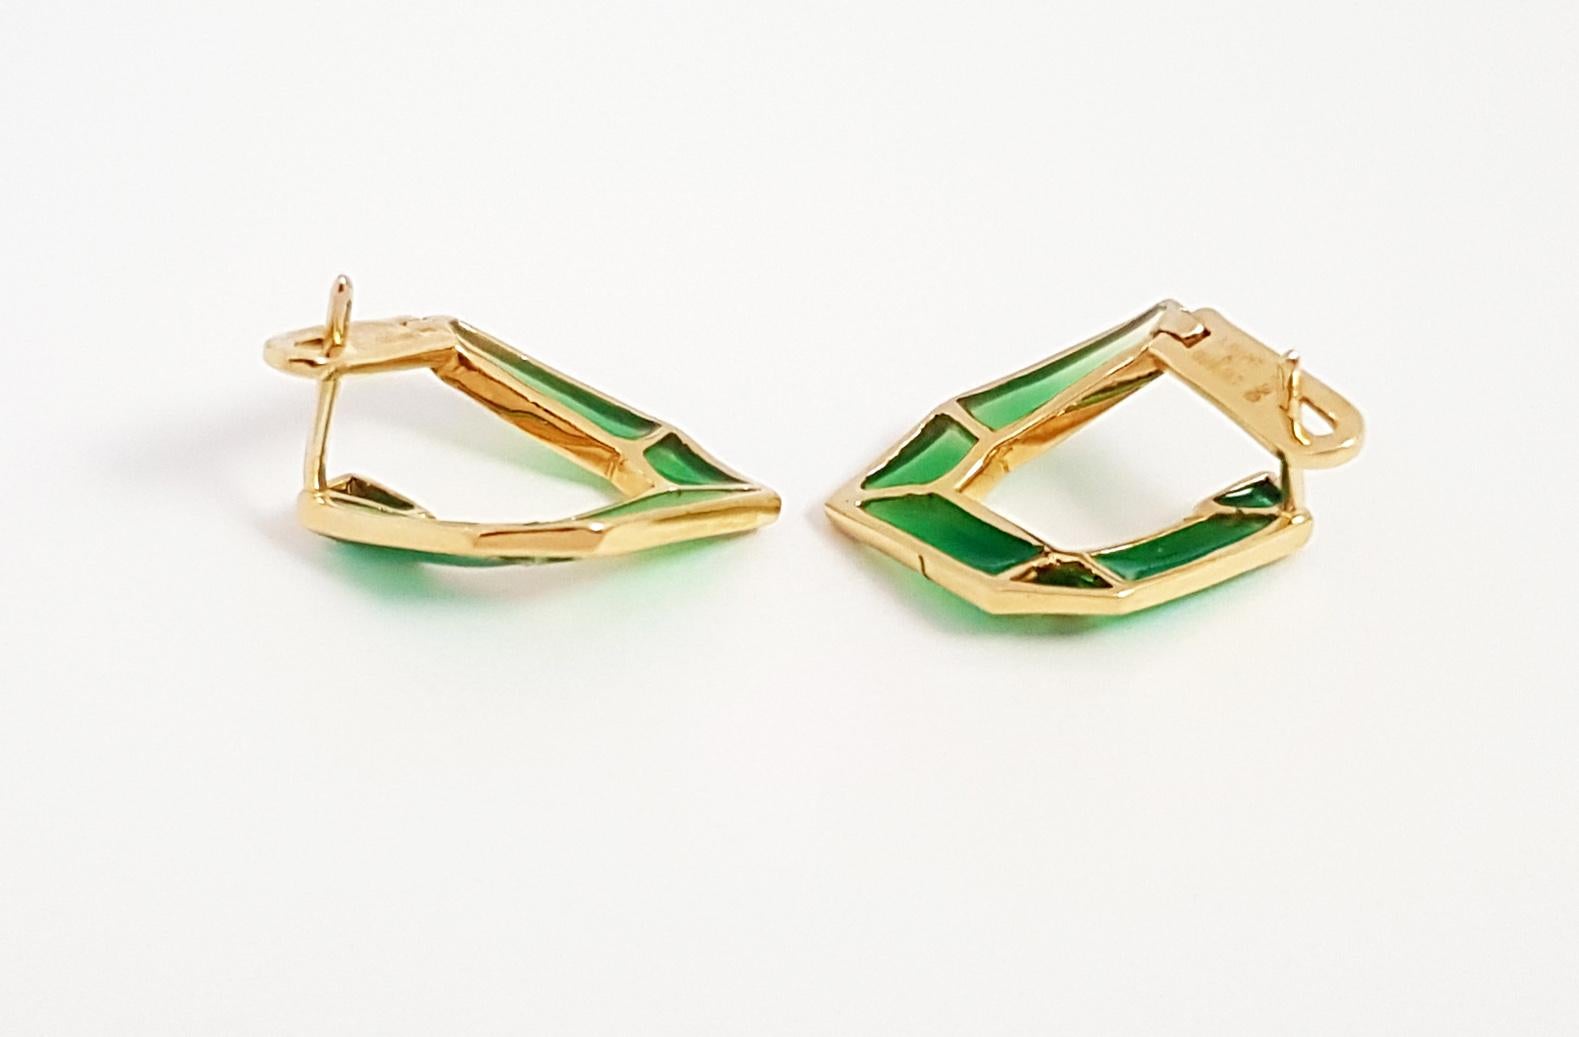 Origami Link No. 5 Tsavorite with Enamel Earrings 18K Yellow Gold Petite For Sale 2